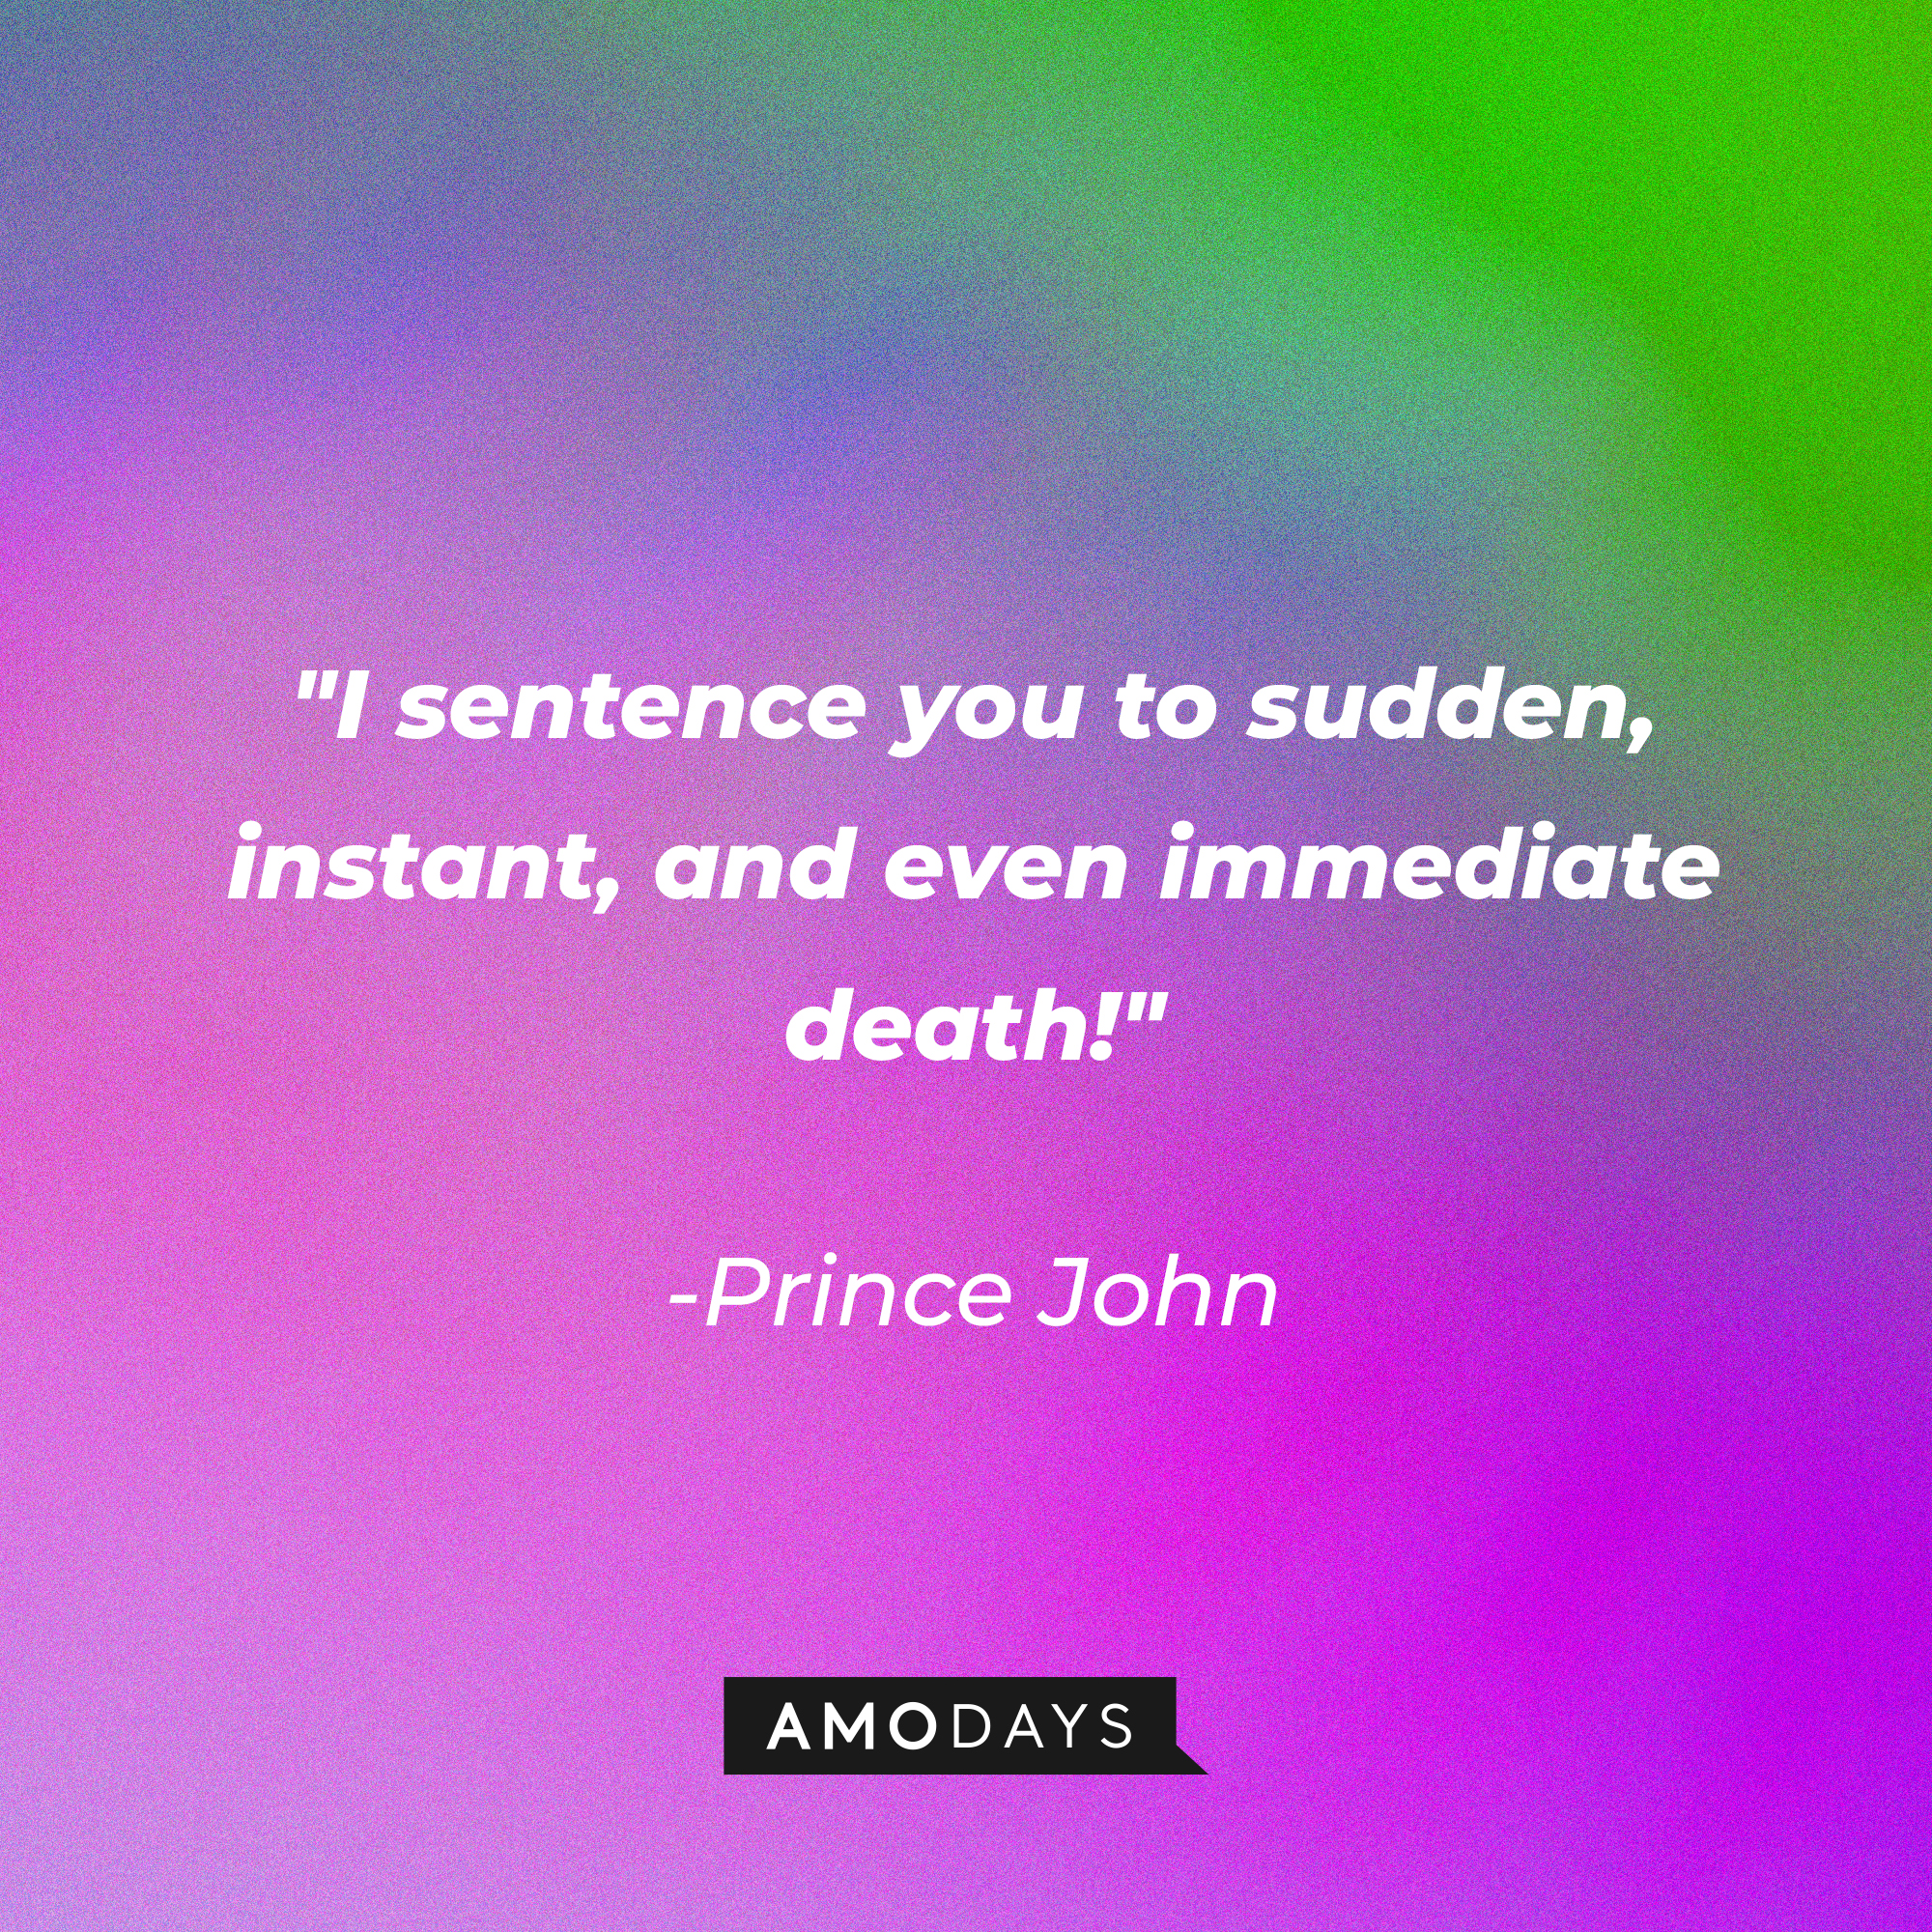 Prince John's quote: "I sentence you to sudden, instant, and even immediate death!" | Source: Amodays